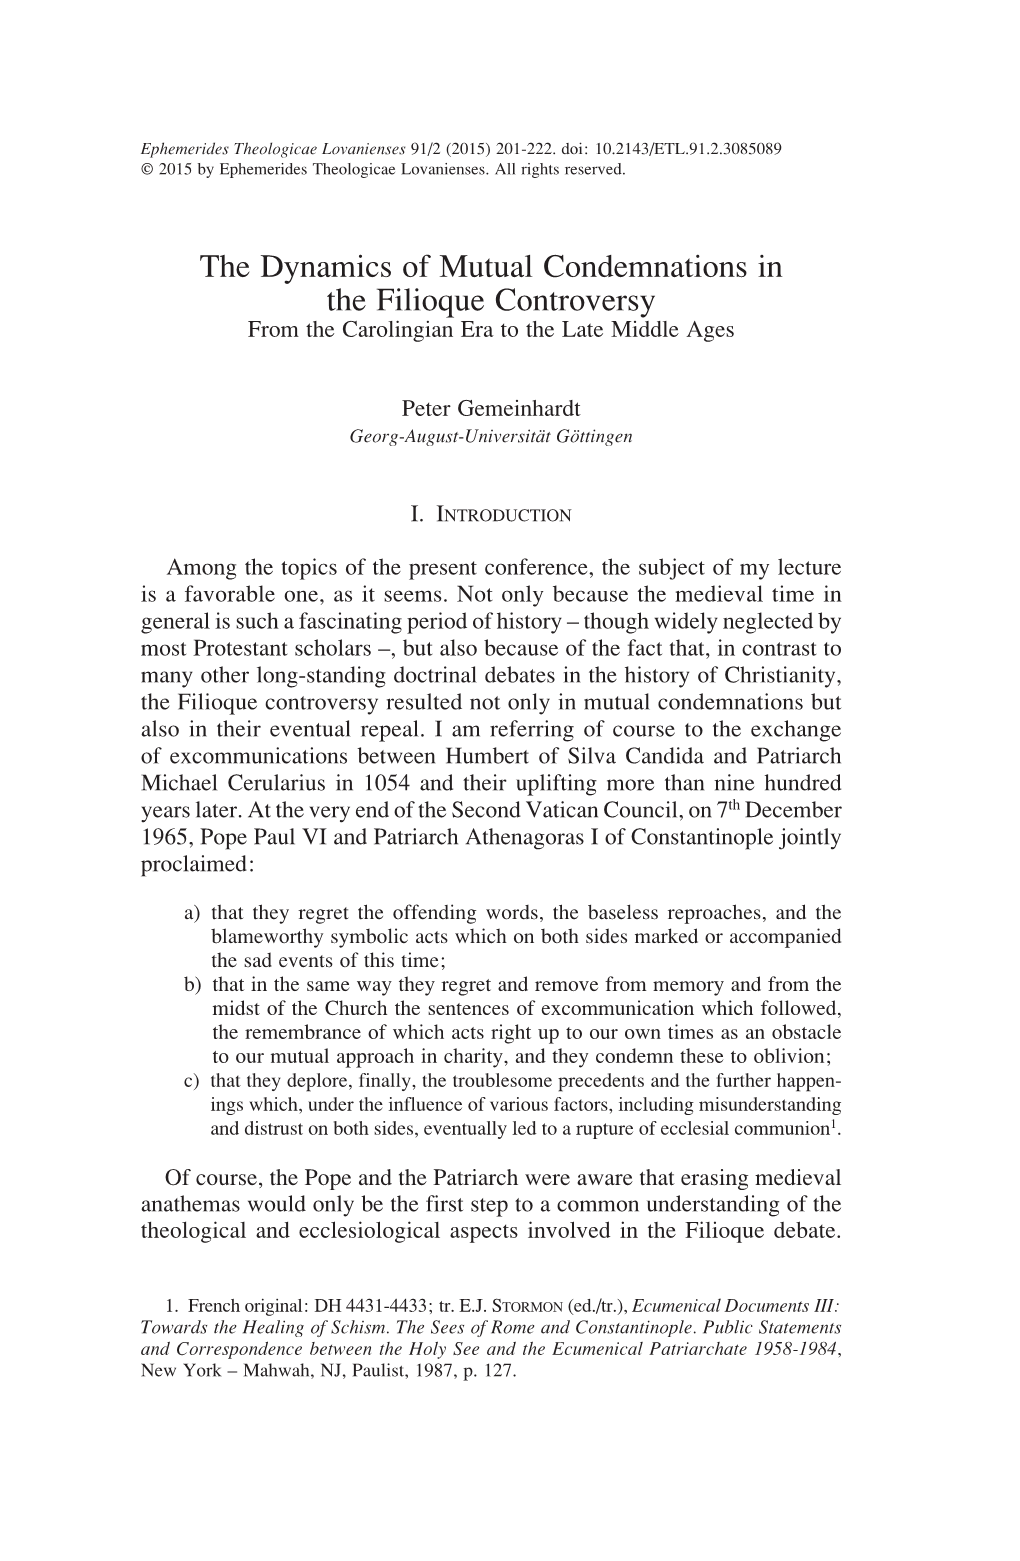 The Dynamics of Mutual Condemnations in the Filioque Controversy from the Carolingian Era to the Late Middle Ages